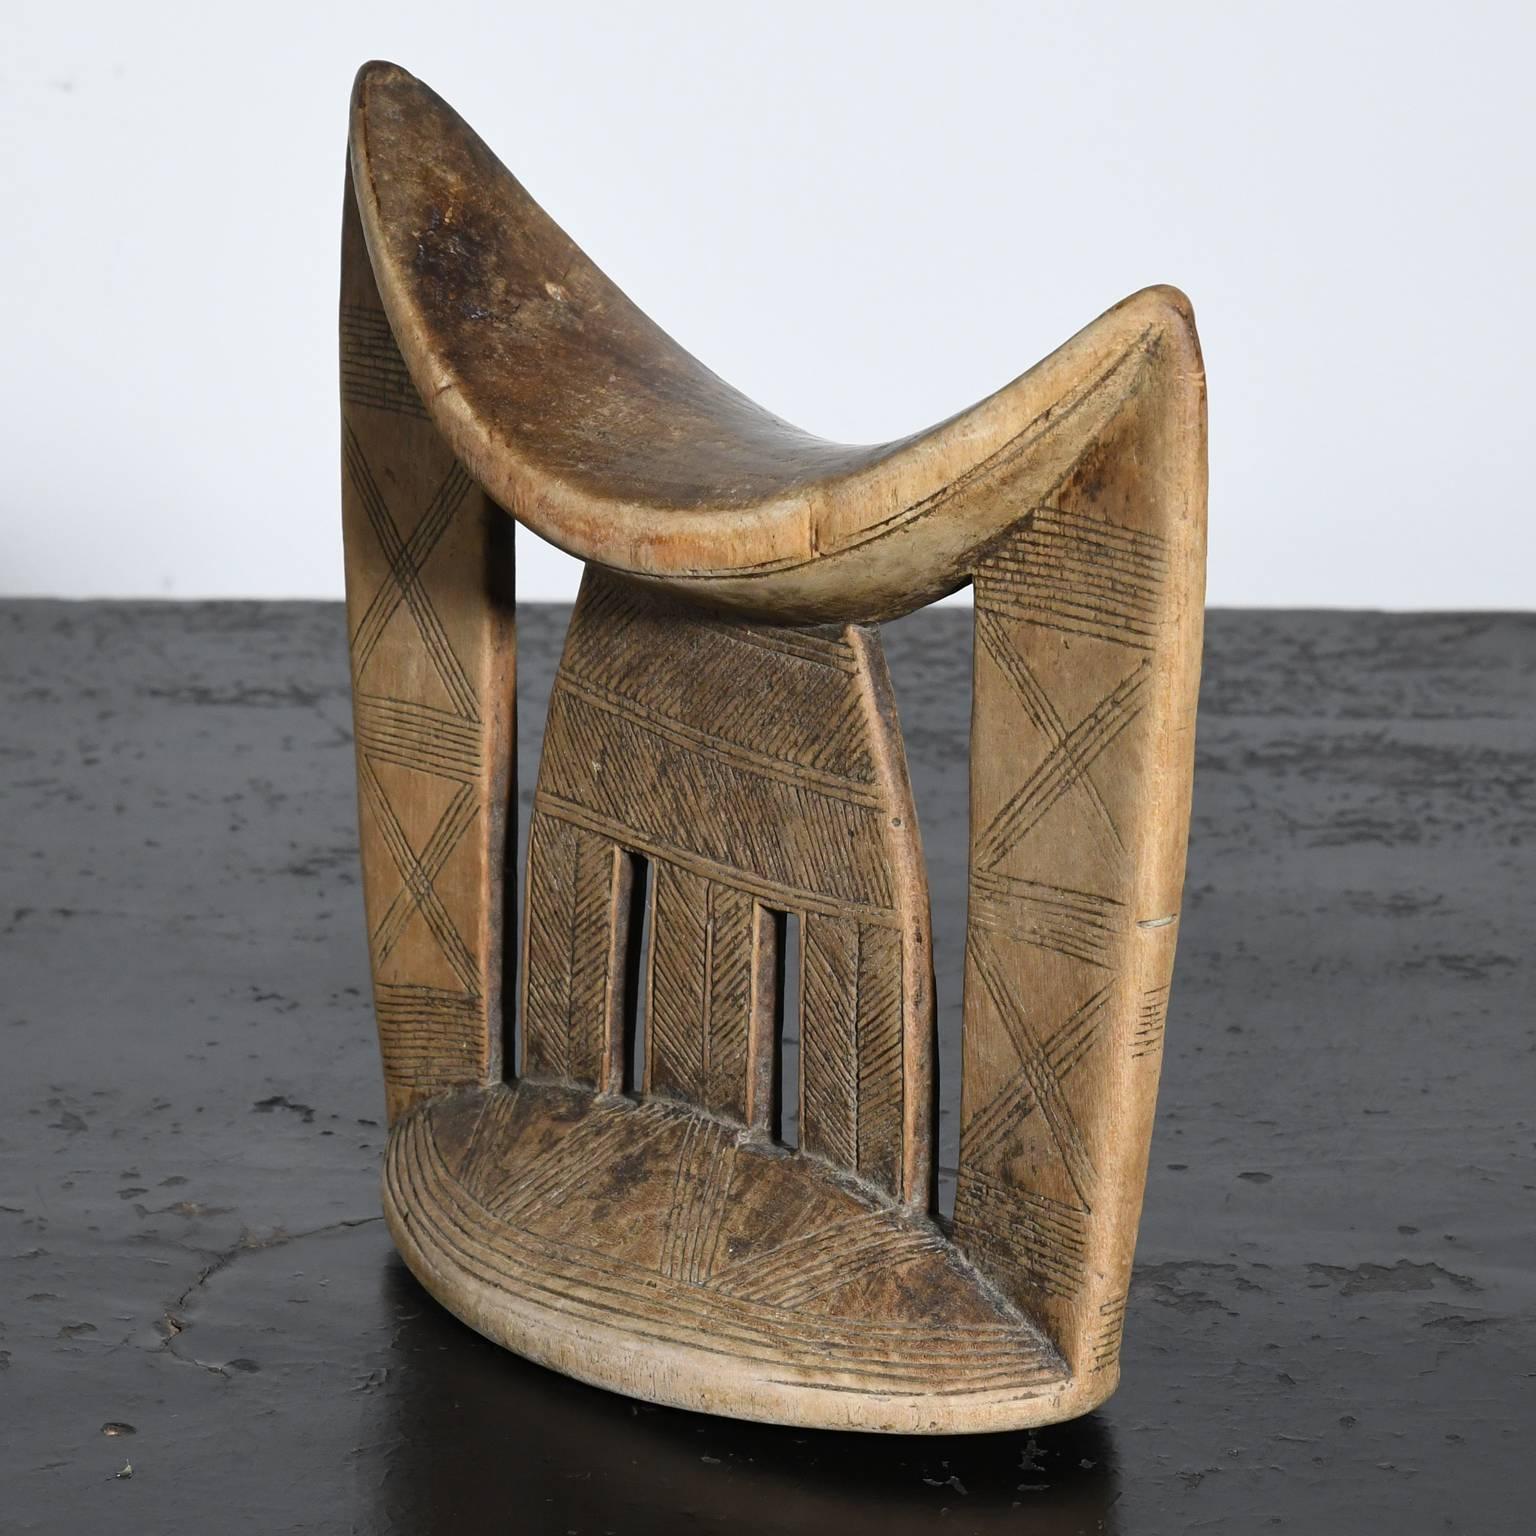 This early 20th century tribal art headrest with incised decorative lines and rich patina is from the Sidamo people of Ethiopia. 
The Sidamo live between Awasa town in the north and Dilla town in the south, spread out in a cone-shaped area of the